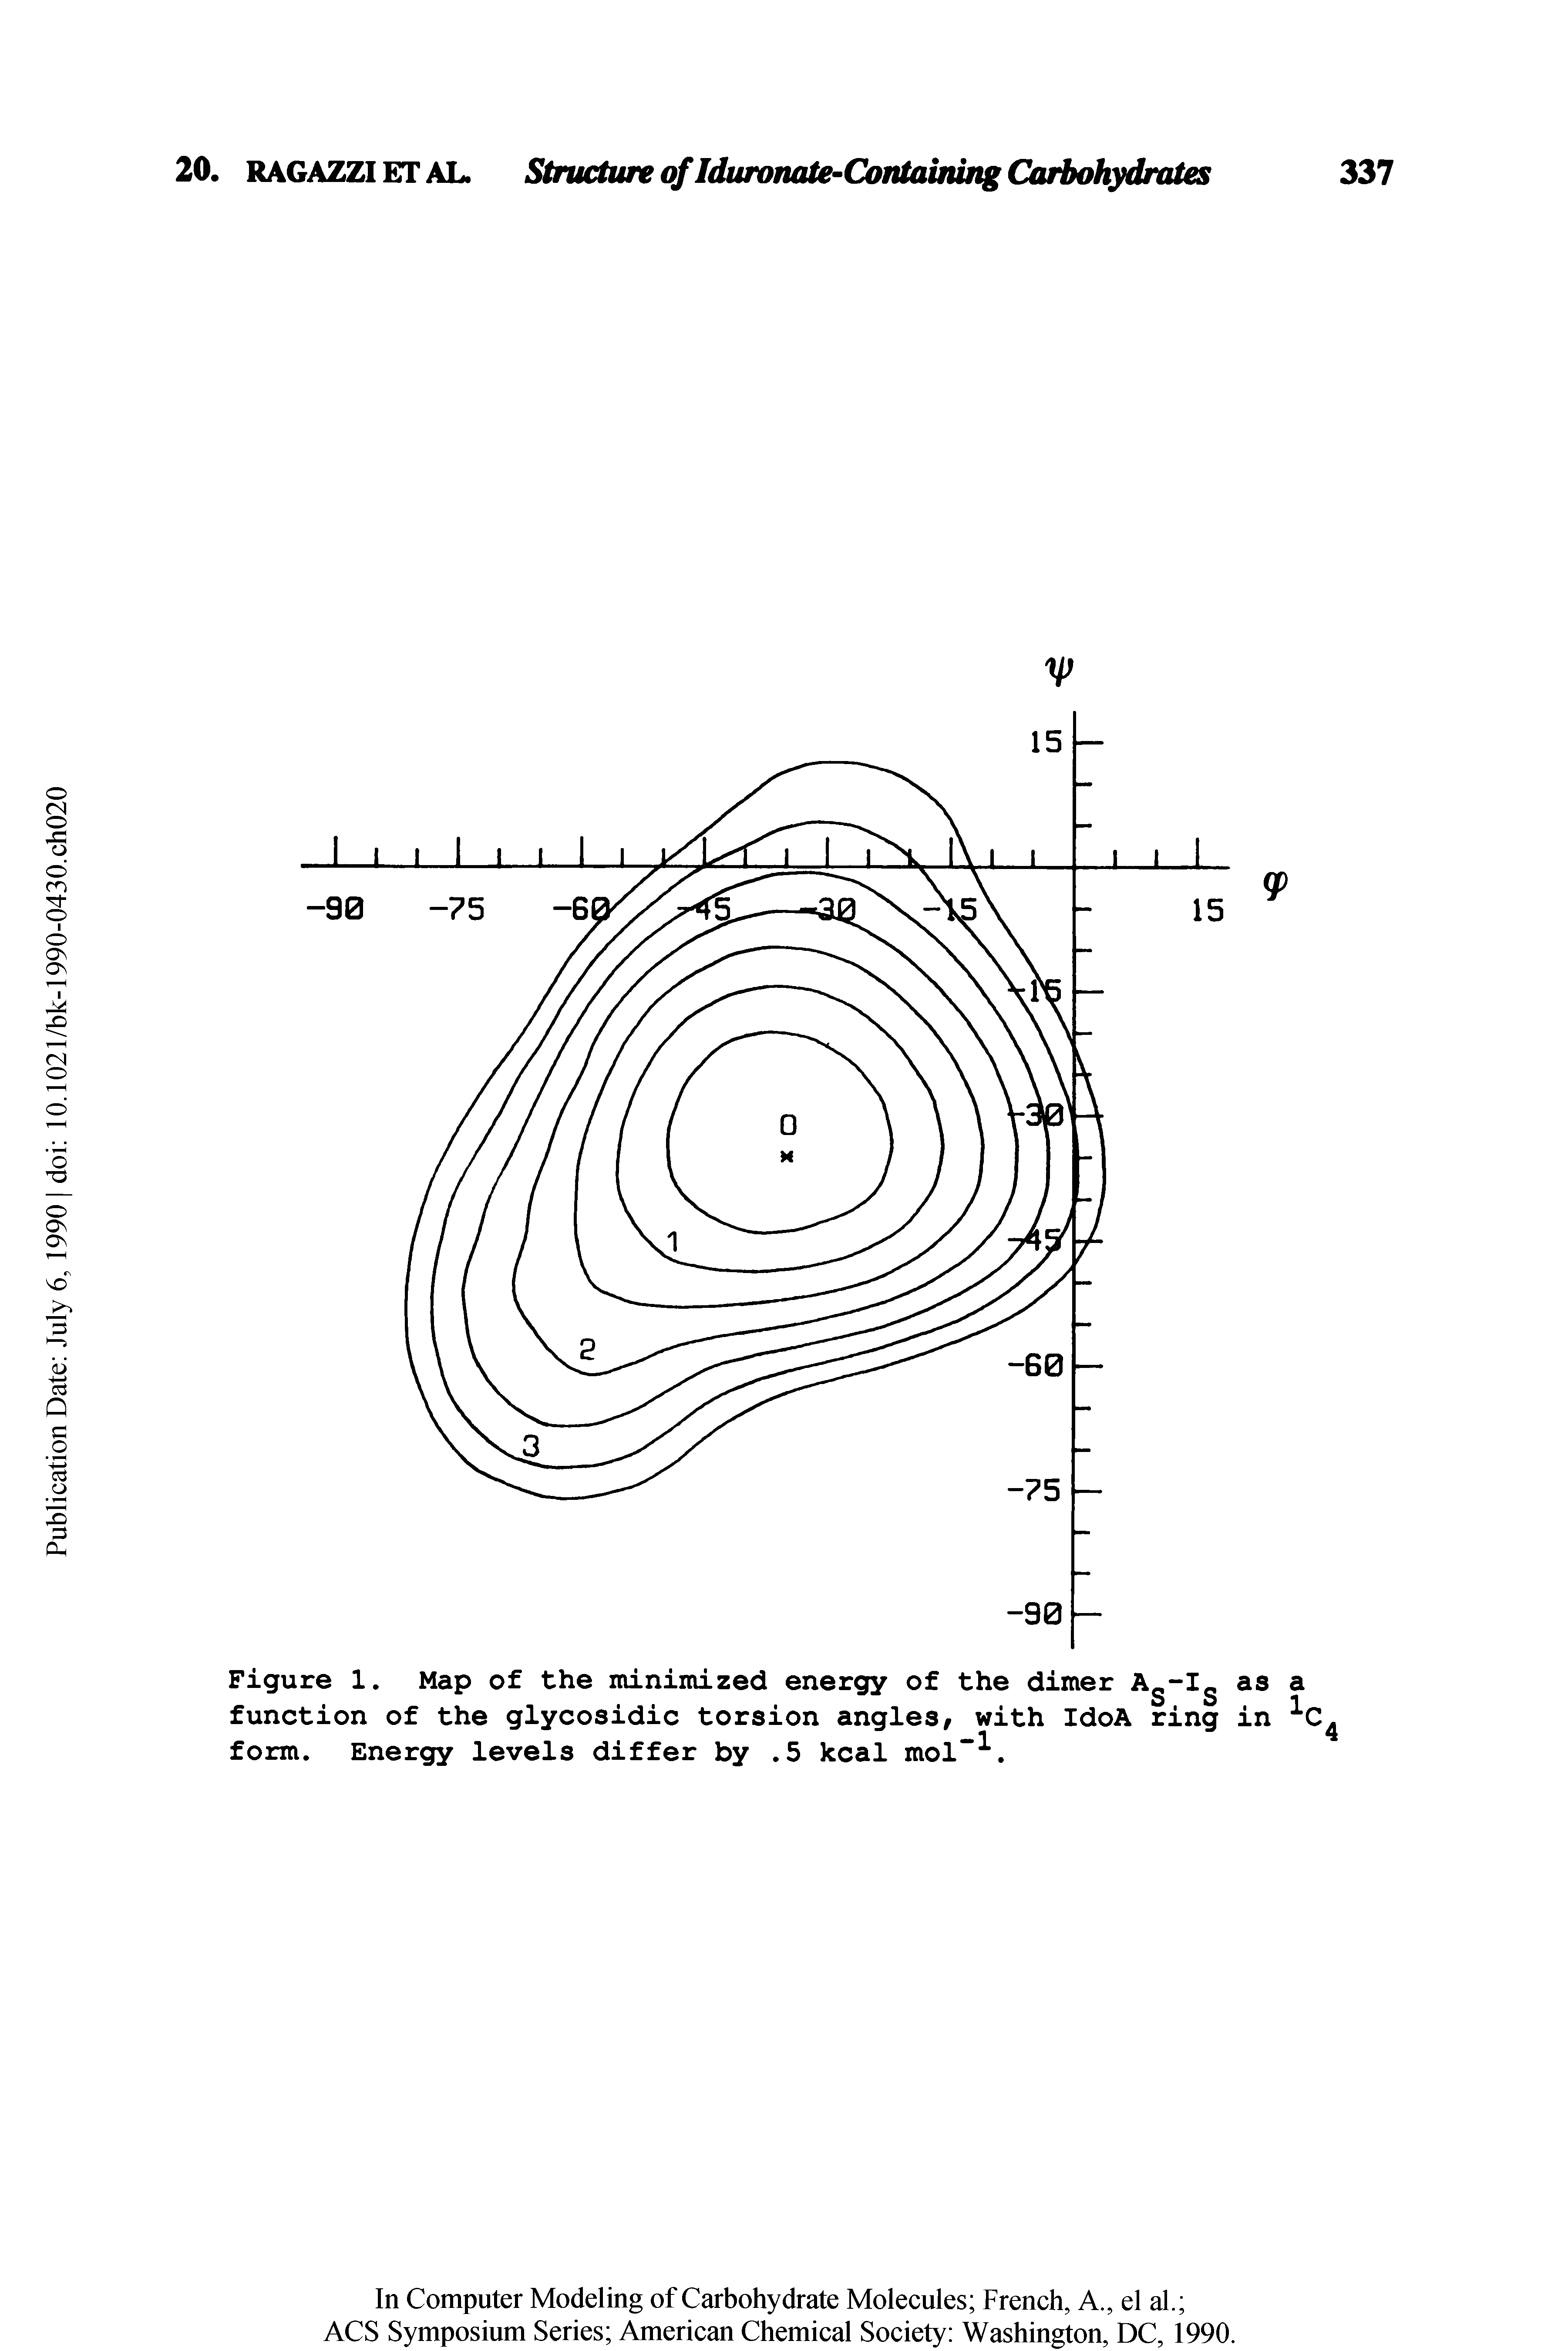 Figure 1. Map of the minimized energy of the dimer Ag-Ig as function of the glycosidic torsion angles, with IdoA ring in form. Energy levels differ by. 5 kcal mol . ...